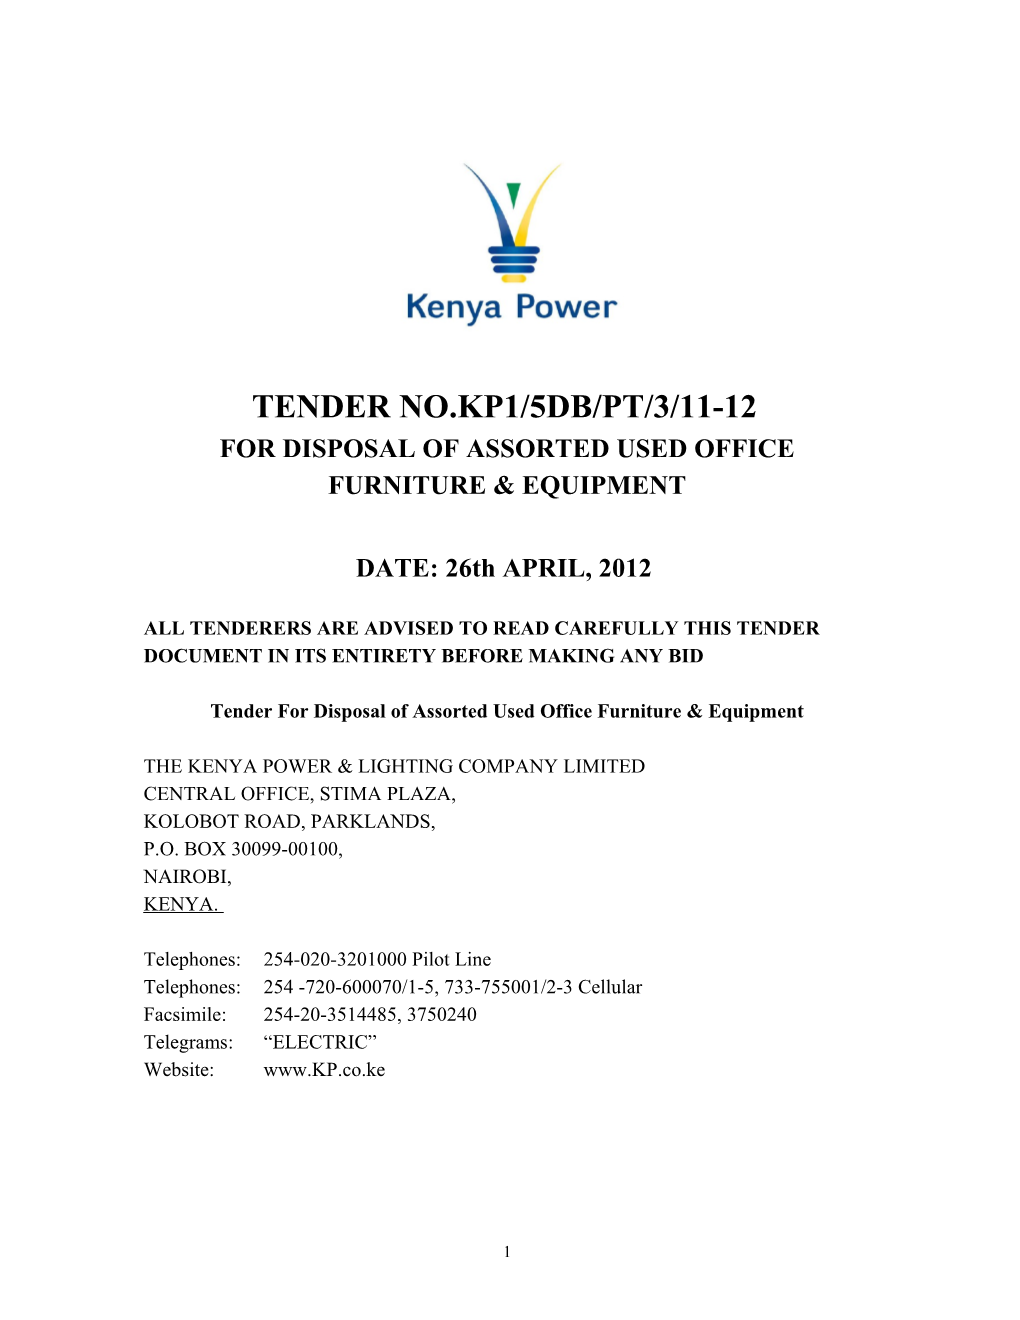 For Disposal of Assorted Used Office Furniture & Equipment